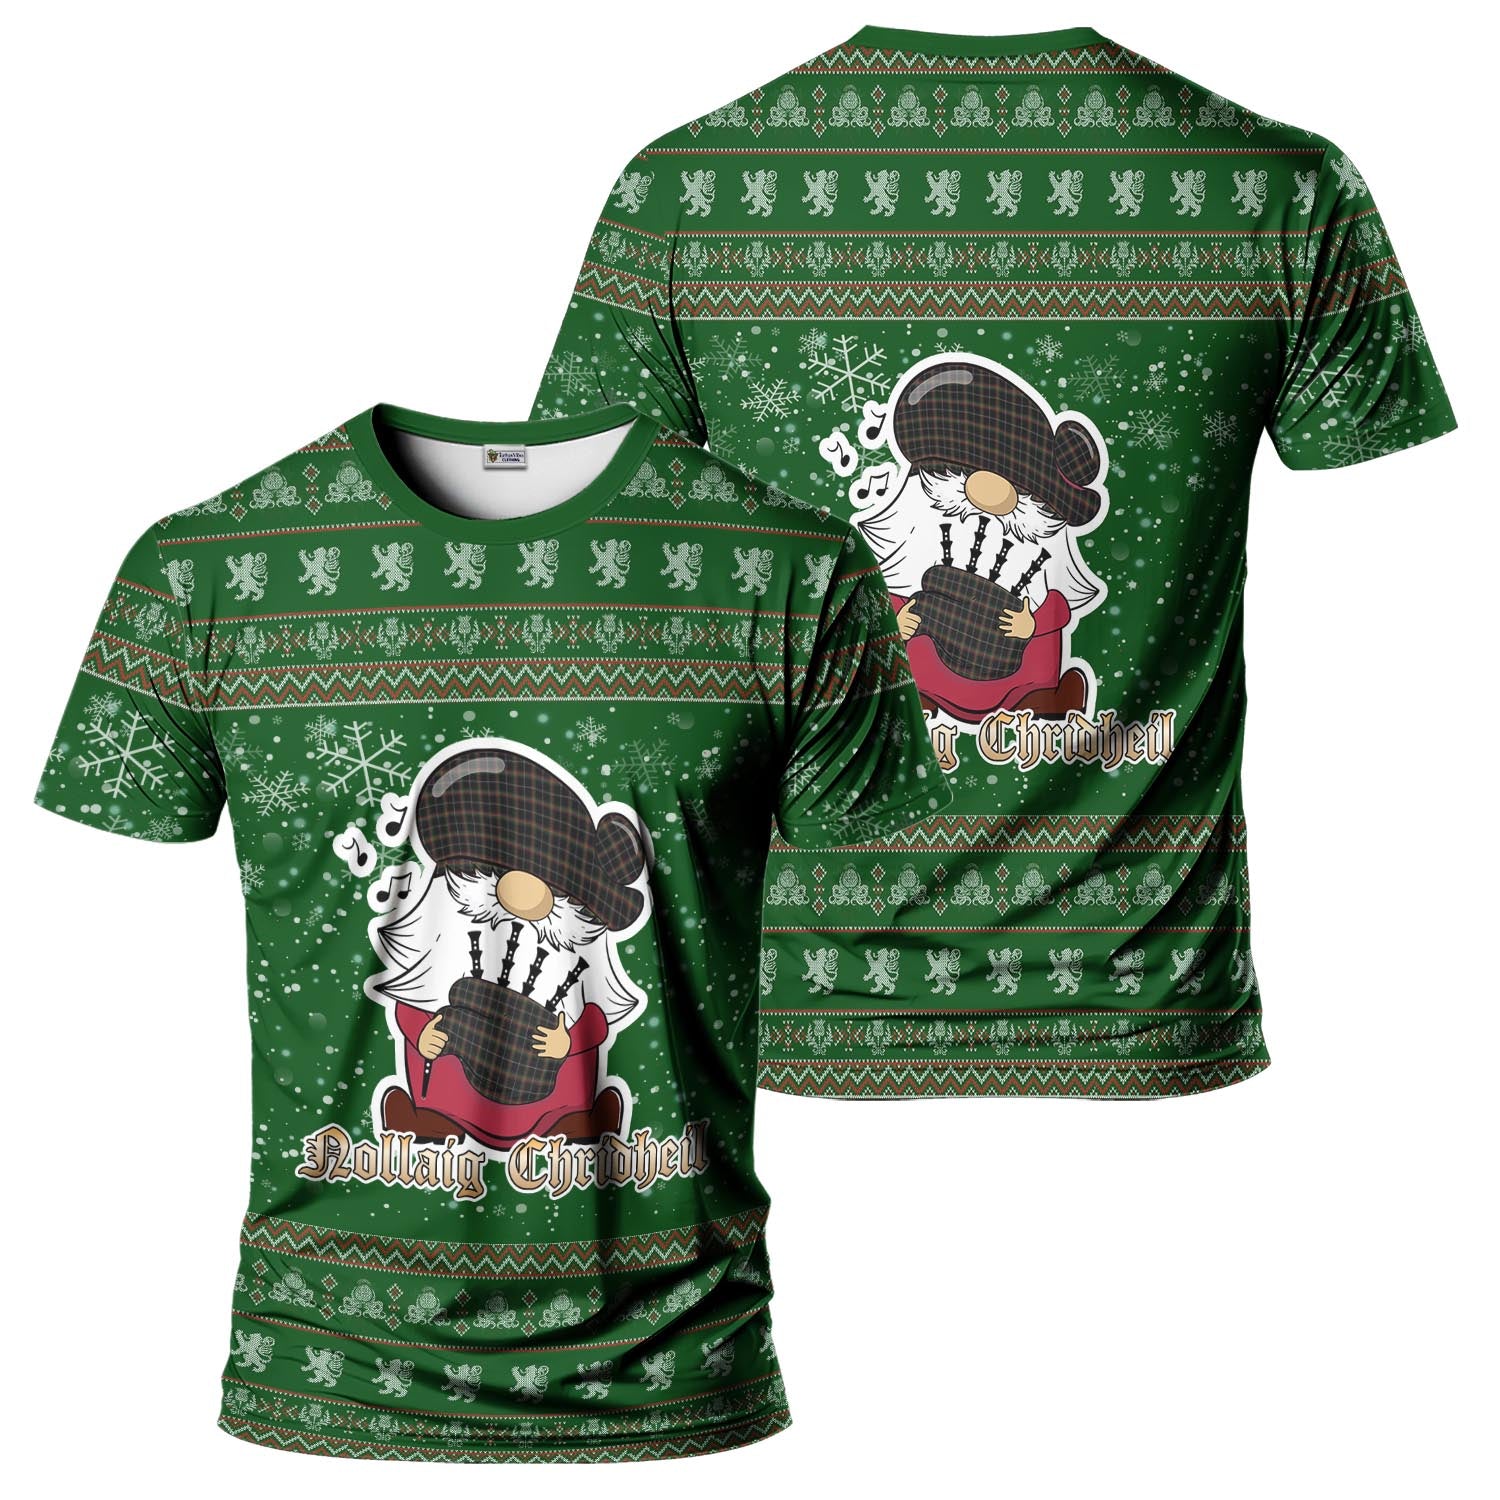 Stott Clan Christmas Family T-Shirt with Funny Gnome Playing Bagpipes Men's Shirt Green - Tartanvibesclothing